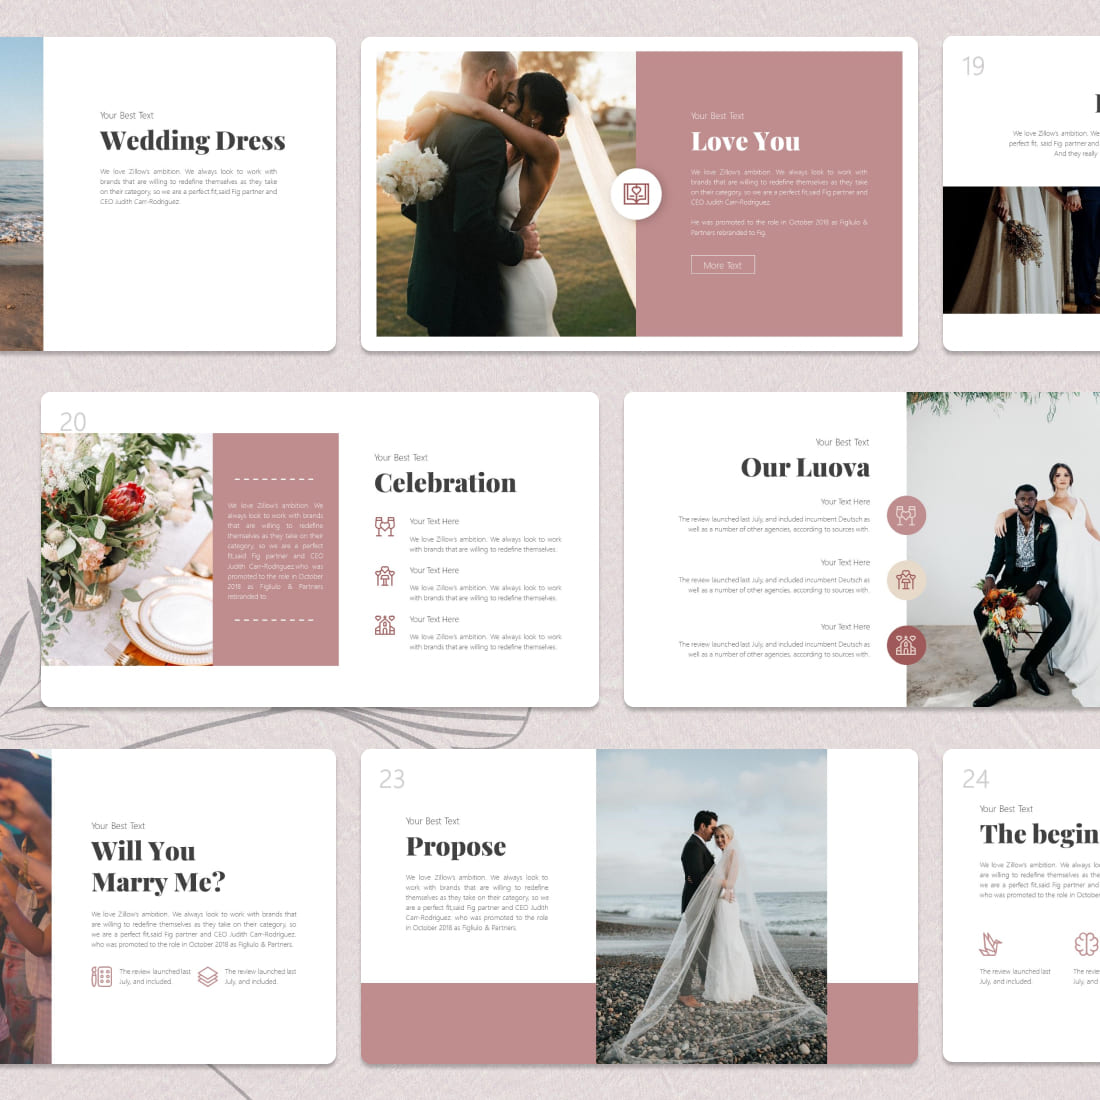 Wedding Planning Presentation Template cover.